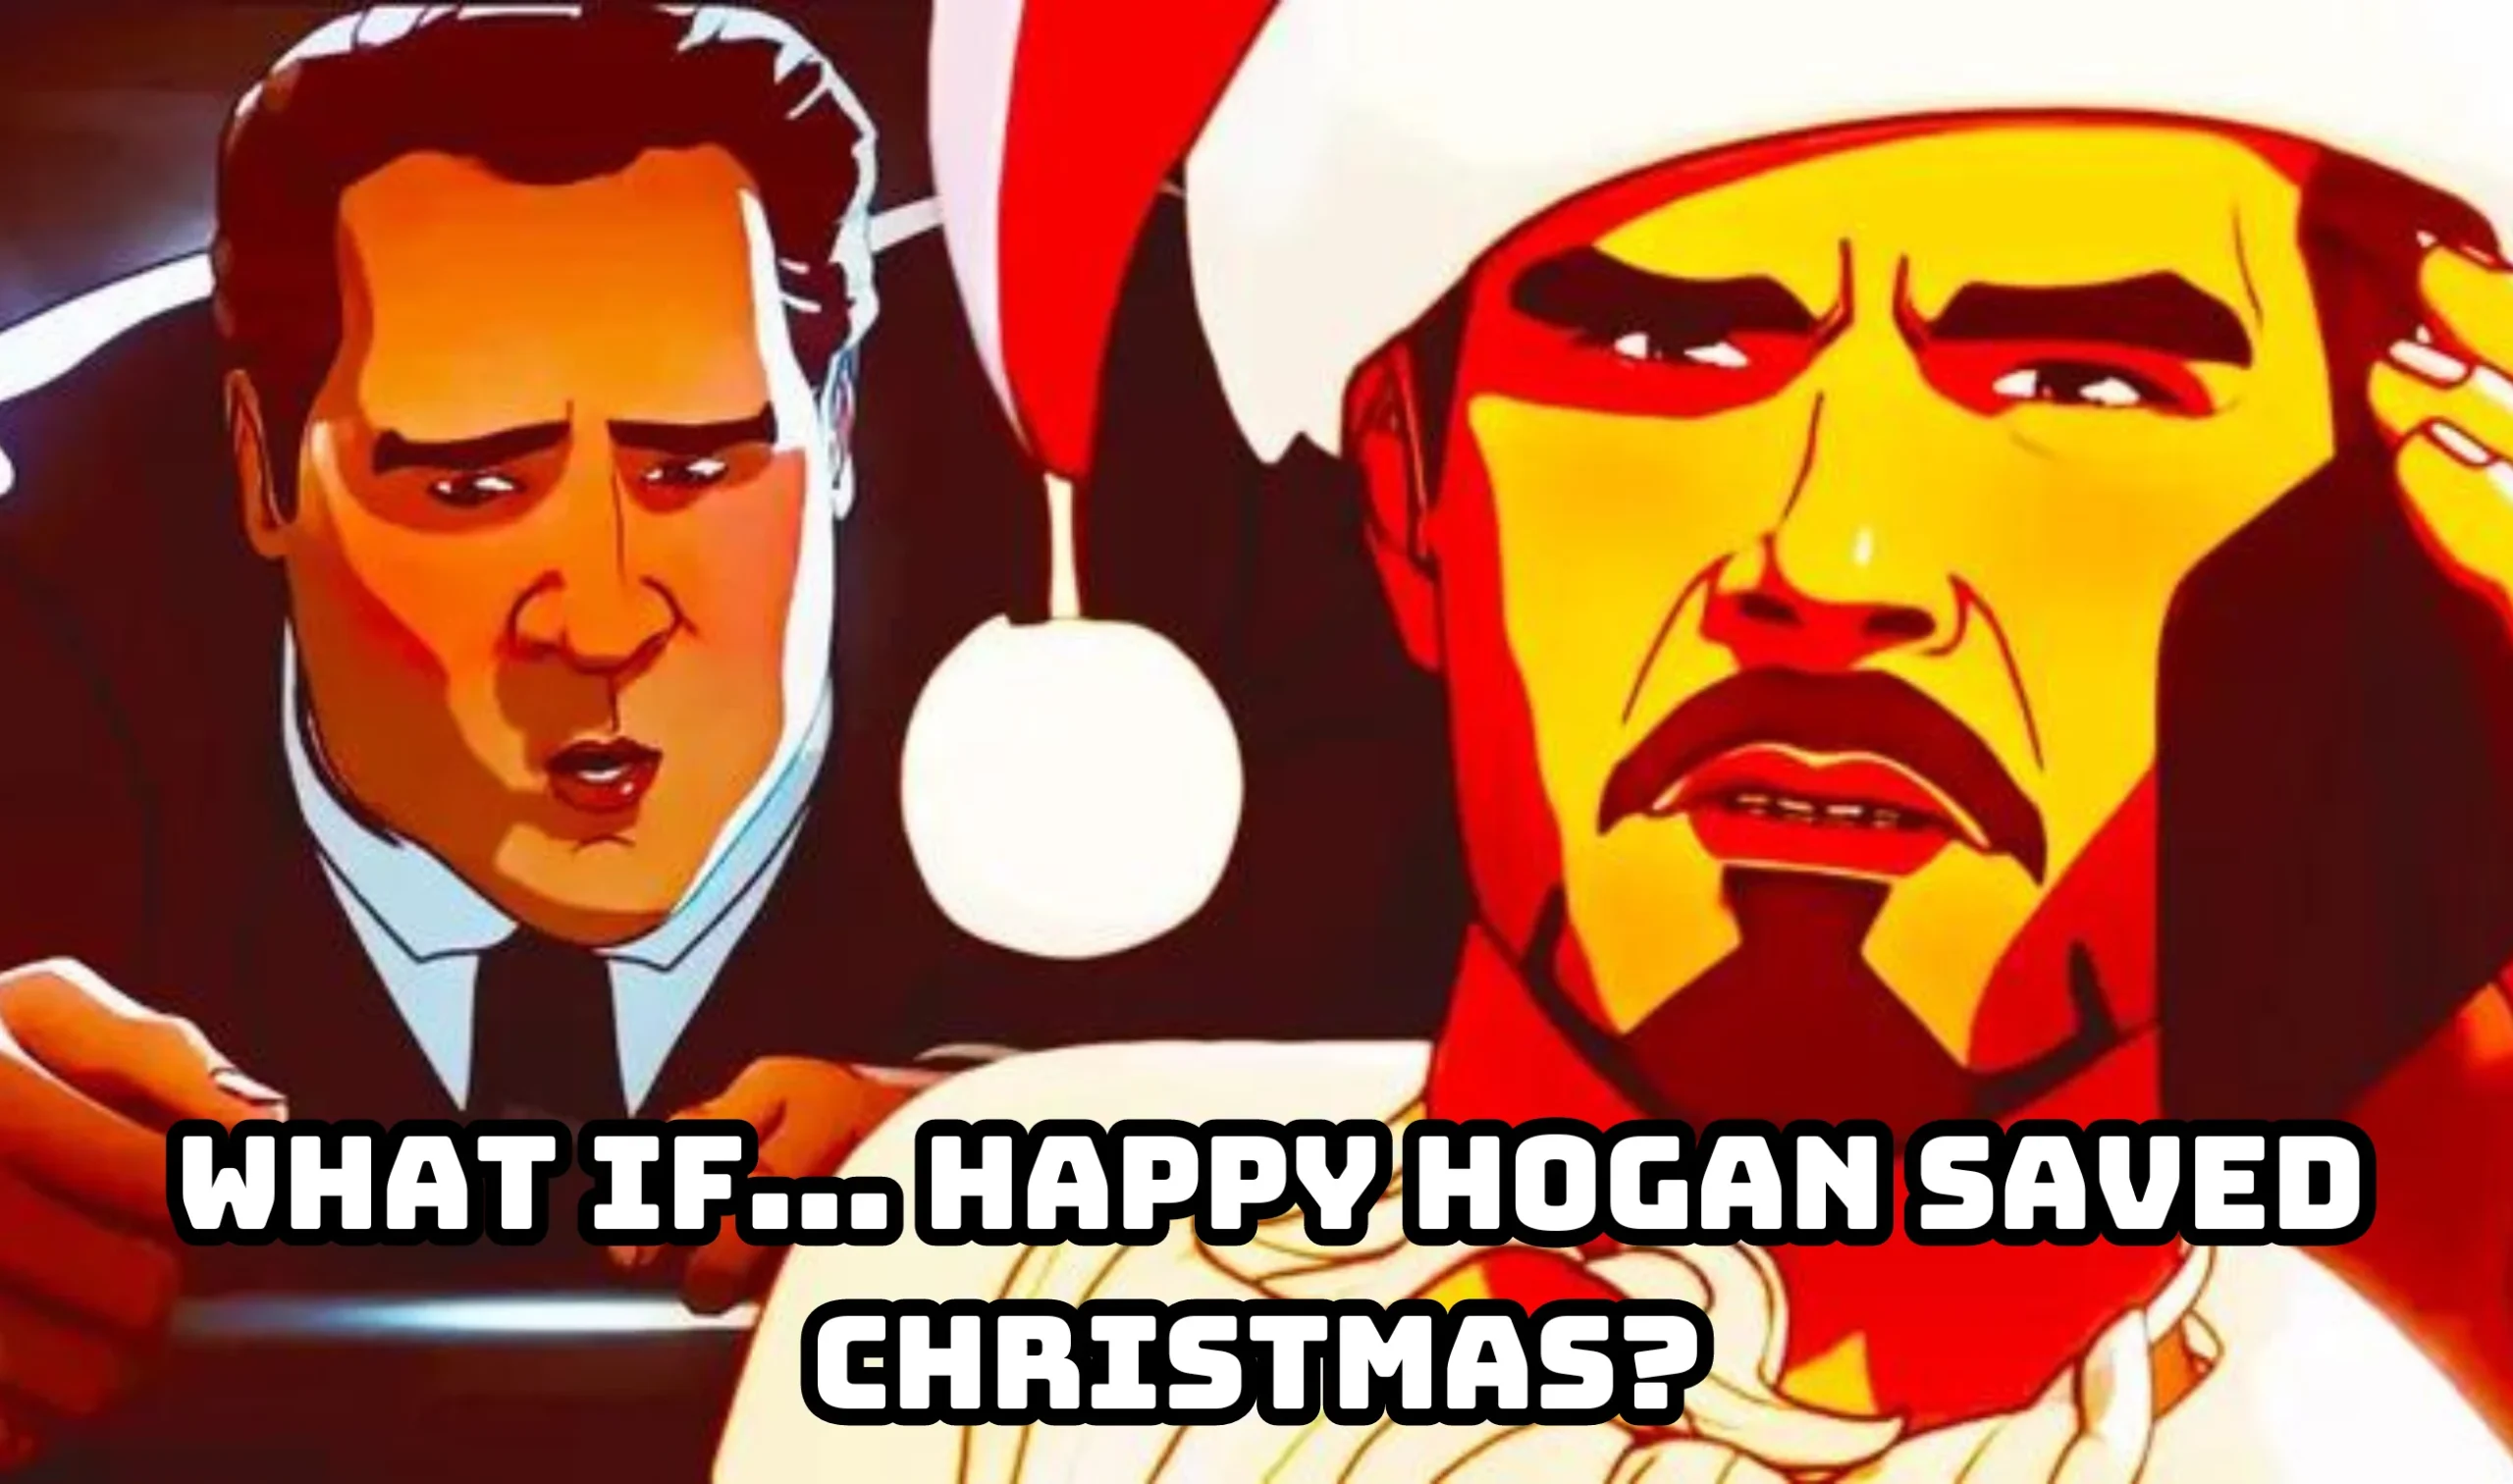 What If Season 2 Episode 3 Review: Happy Hogan Saved Christmas?